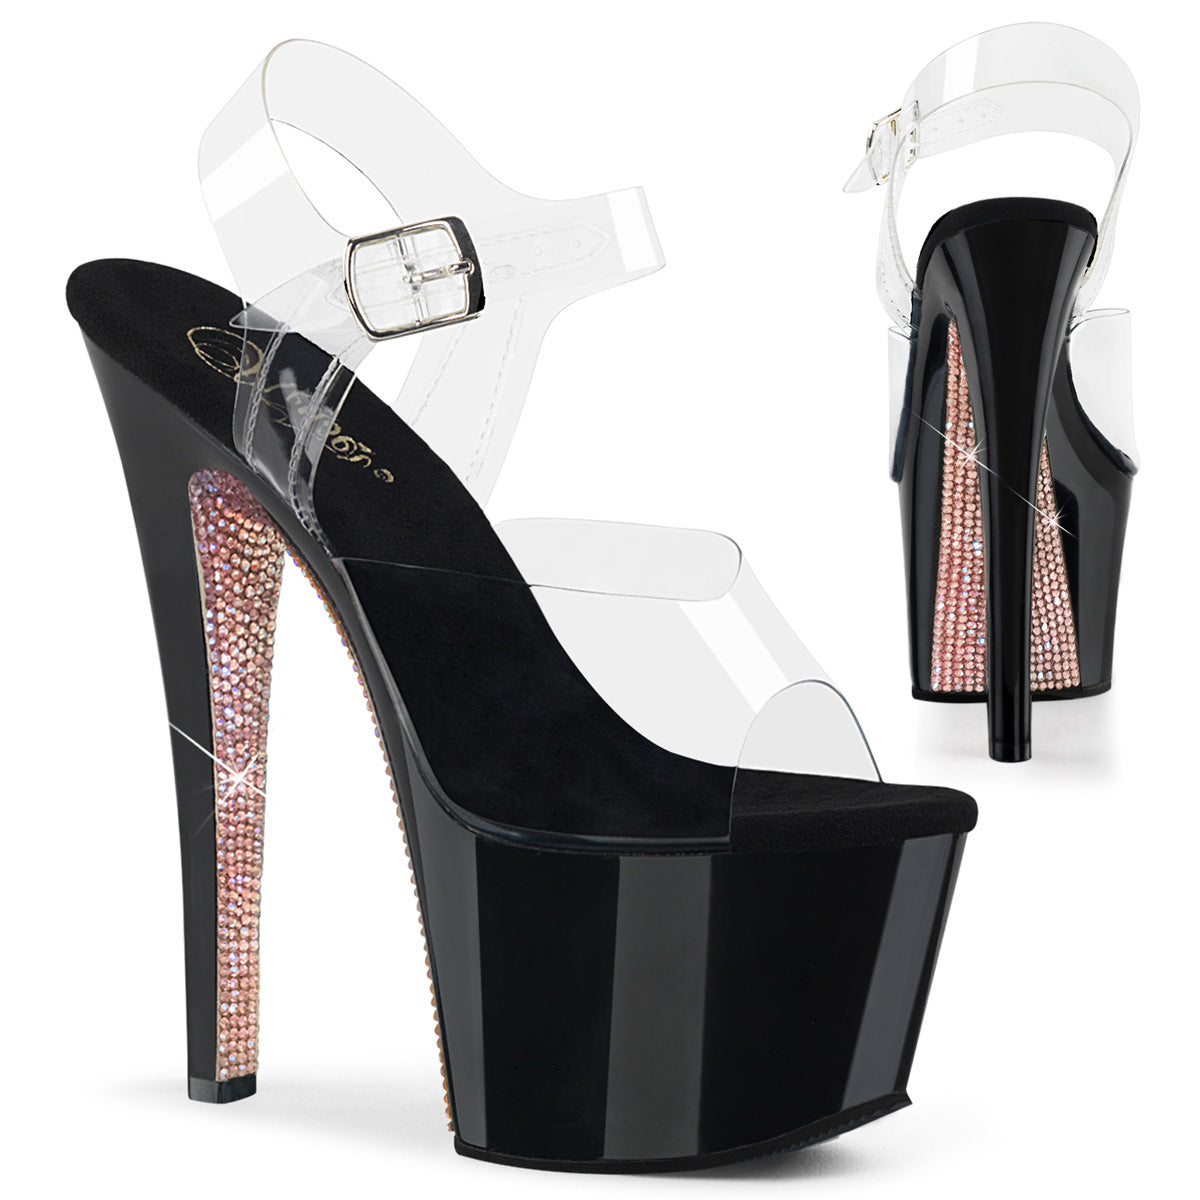 SKY-308CRS 7" Heel Clear Black-Champagne Pole Dance Shoes